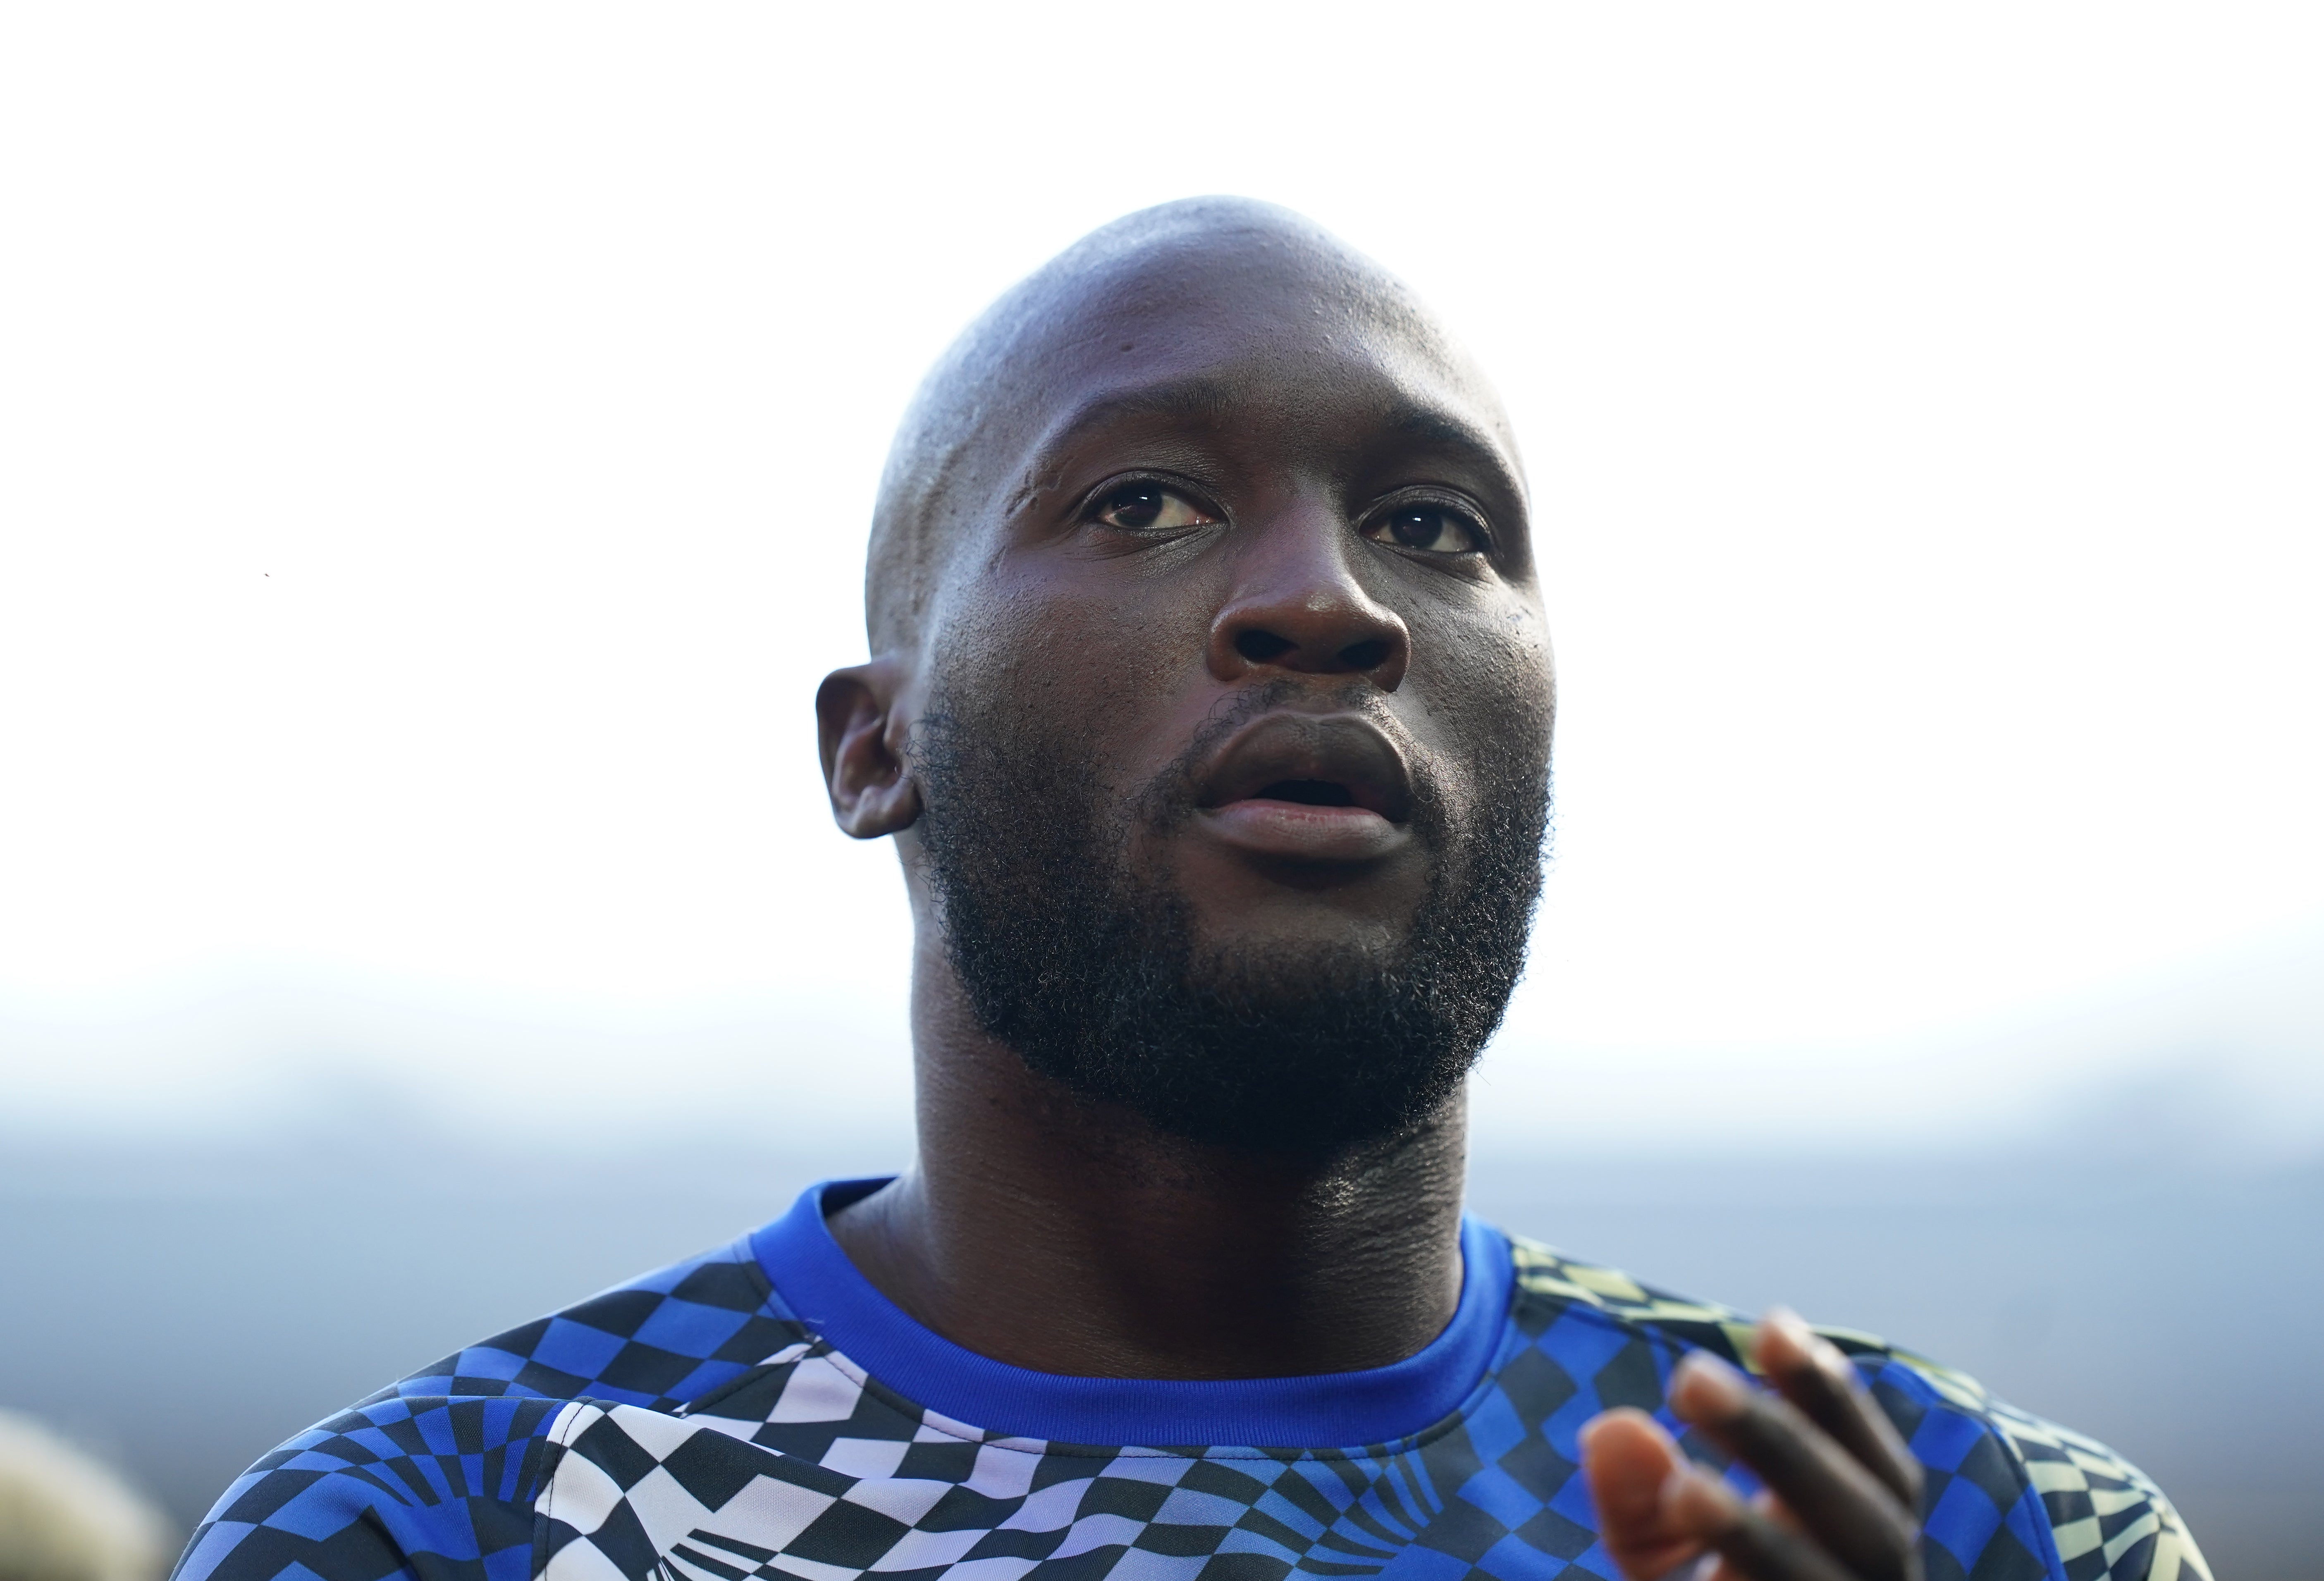 Romelu Lukaku was left out because of the ‘noise’ around an interview aired on Thursday